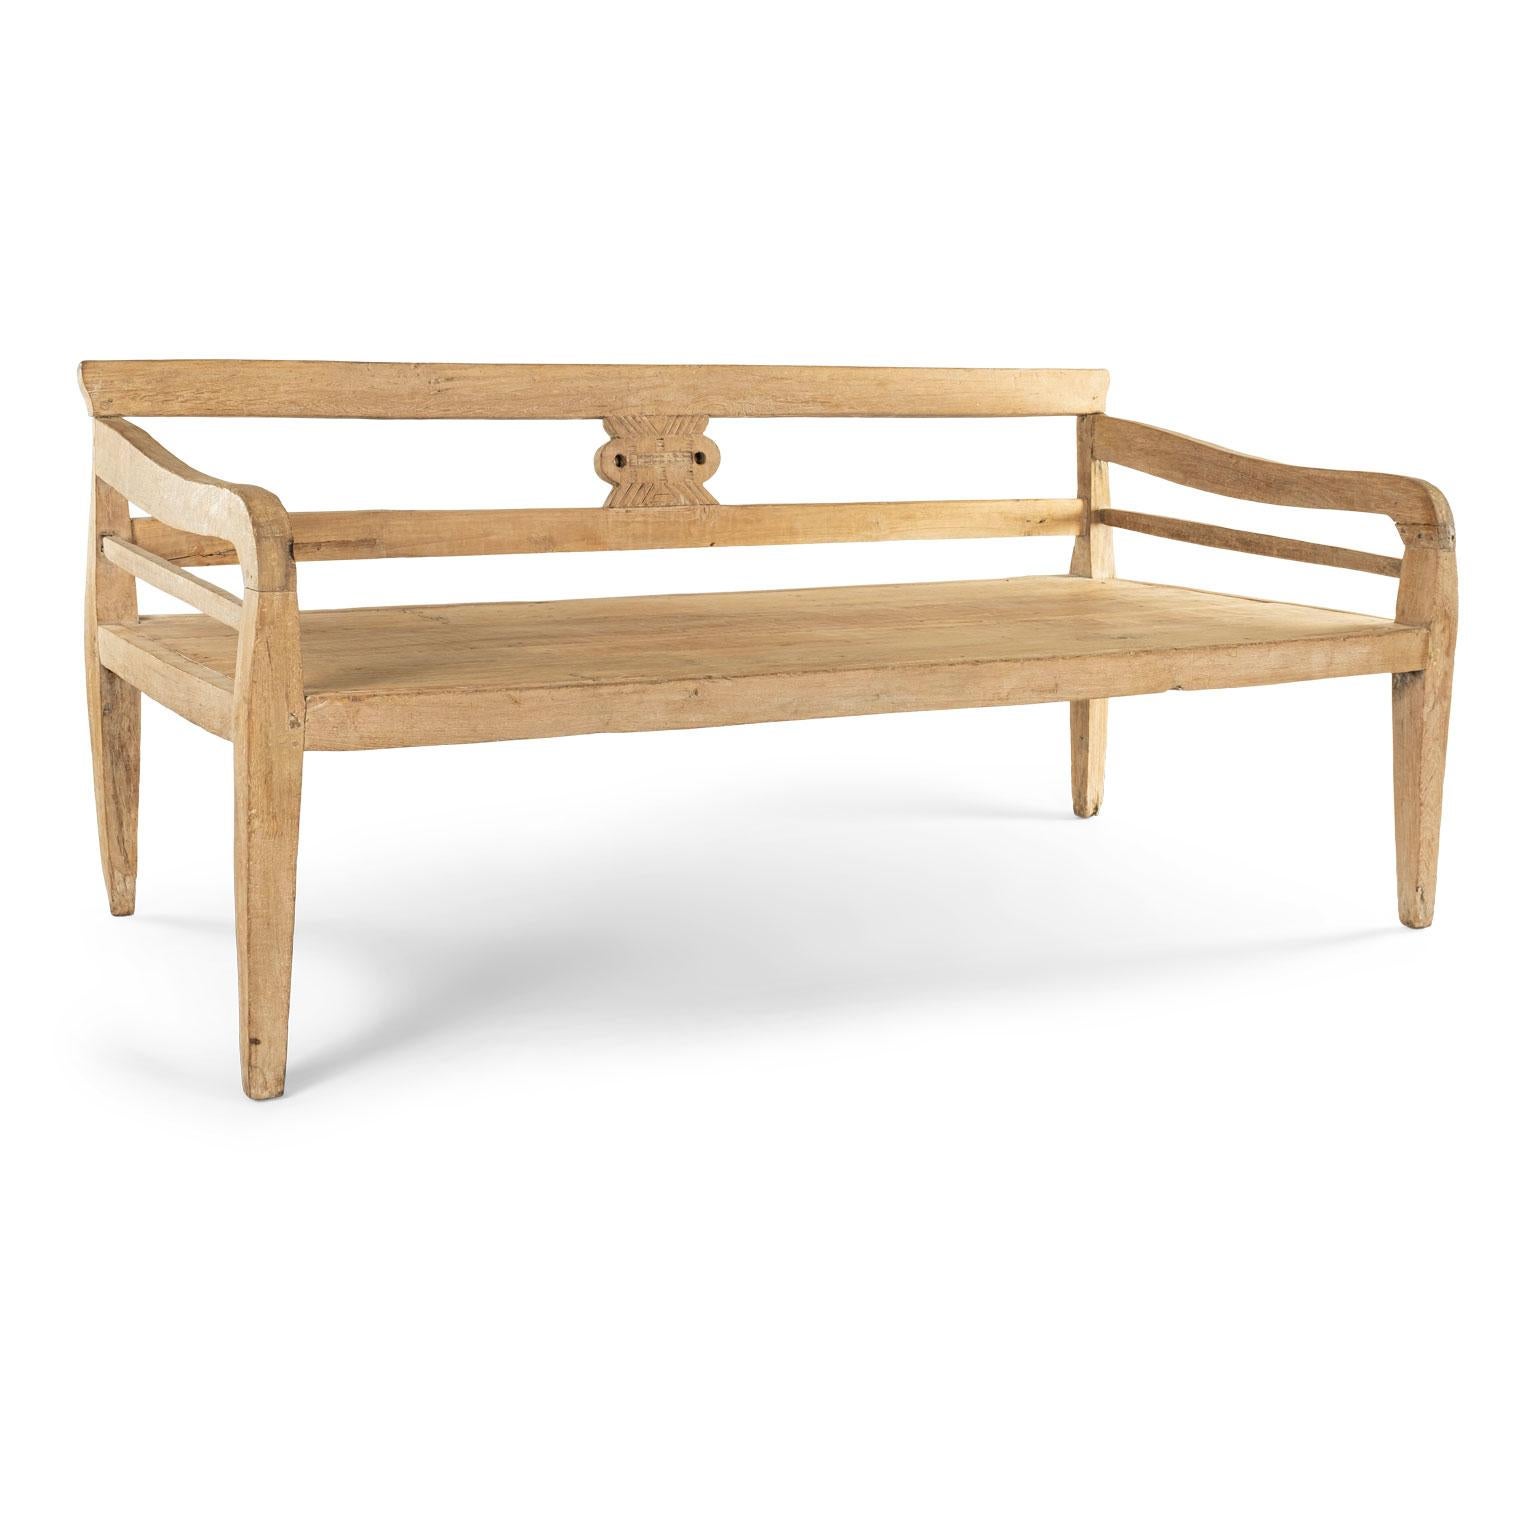 British Colonial Style Pine Daybed or Deep Bench 1